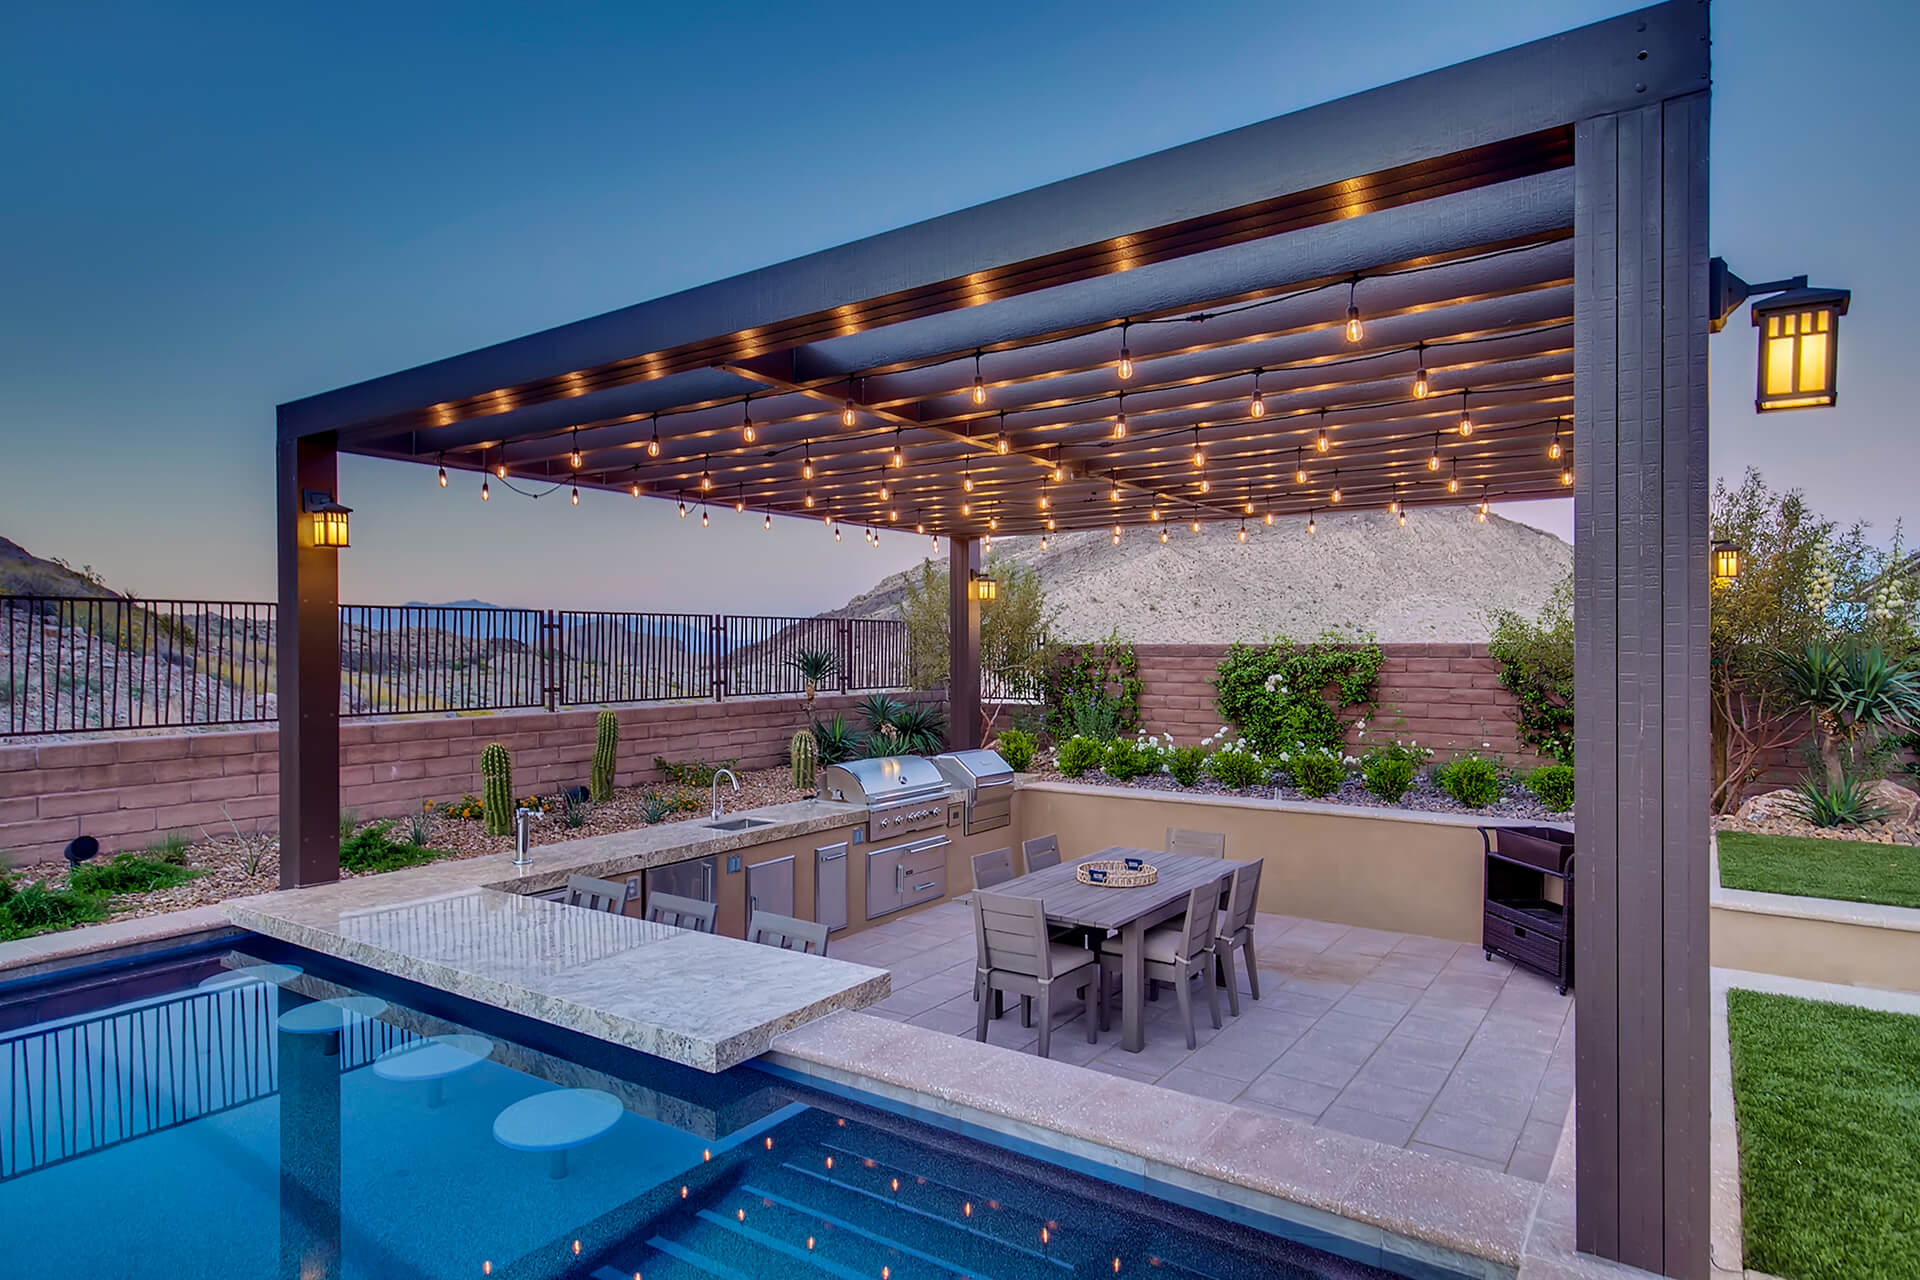 A pool and patio with lights above the table.